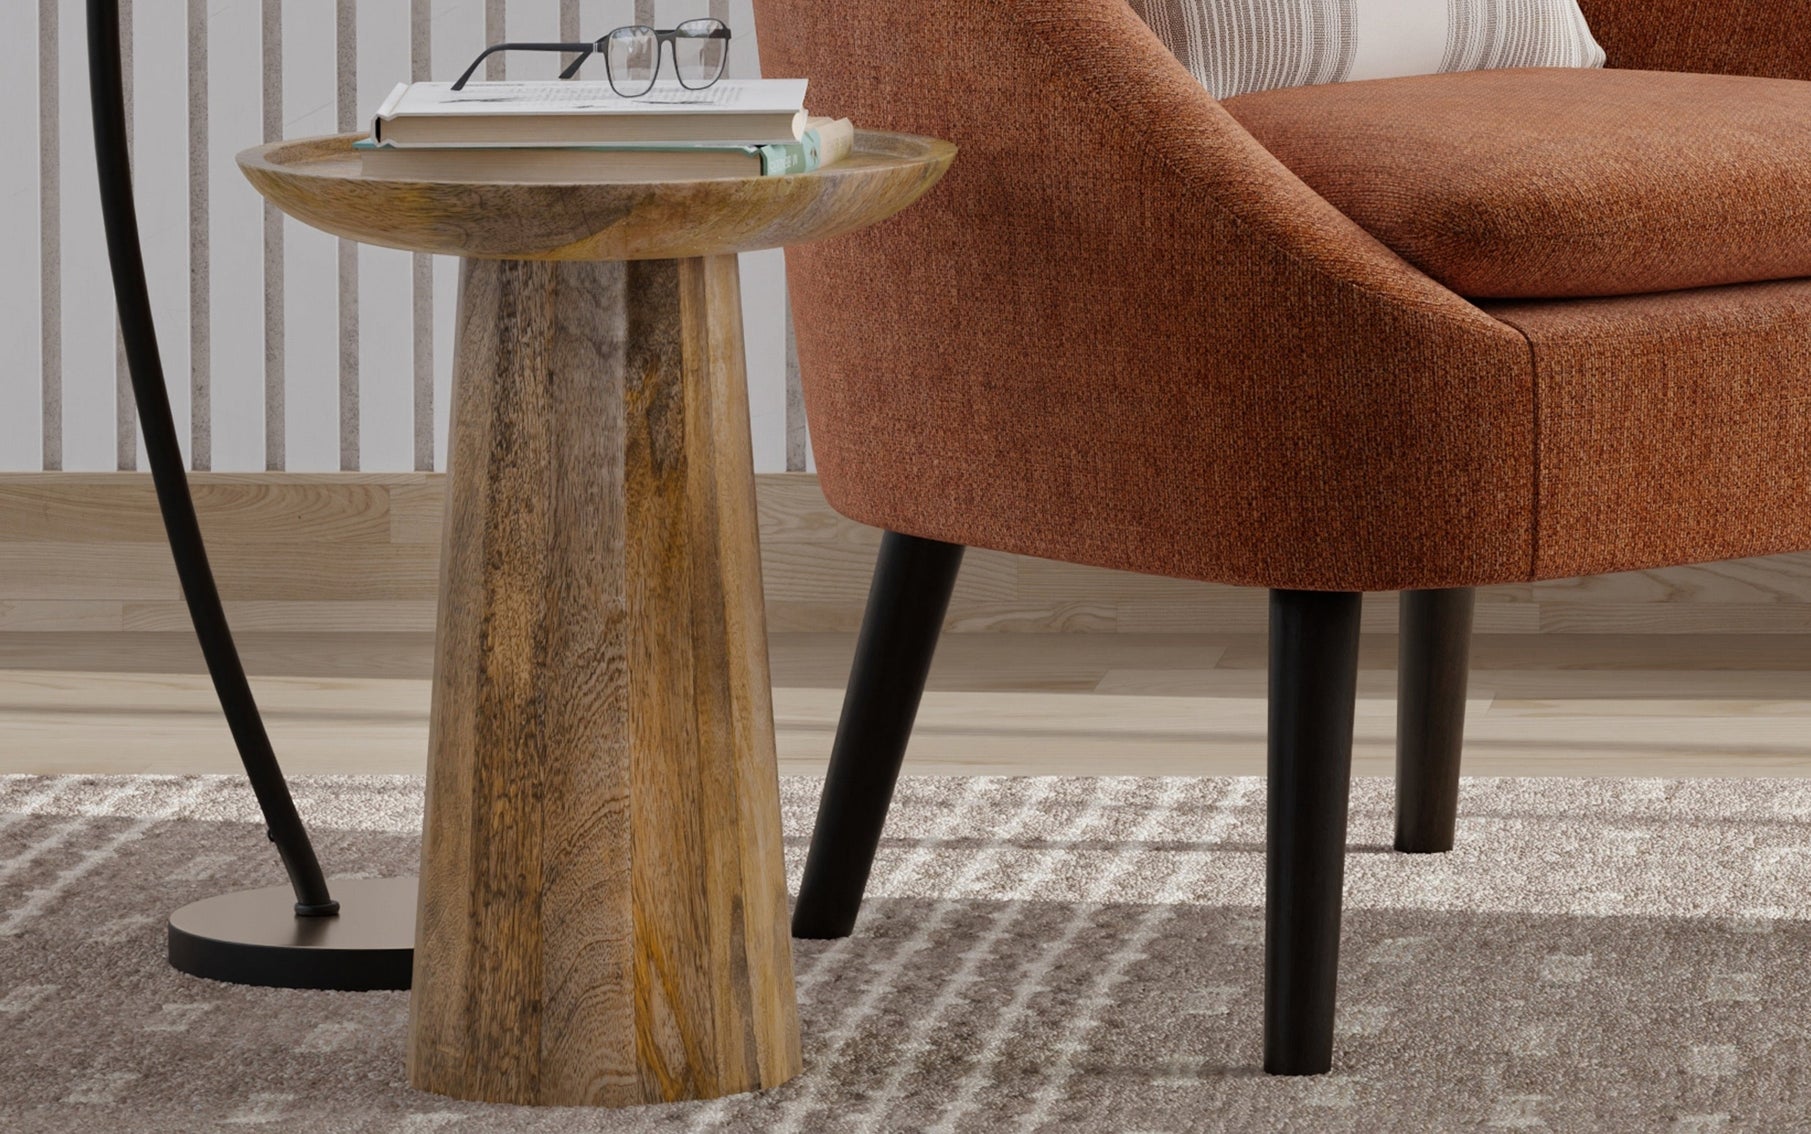 Natural | Dayton Wooden Accent Table